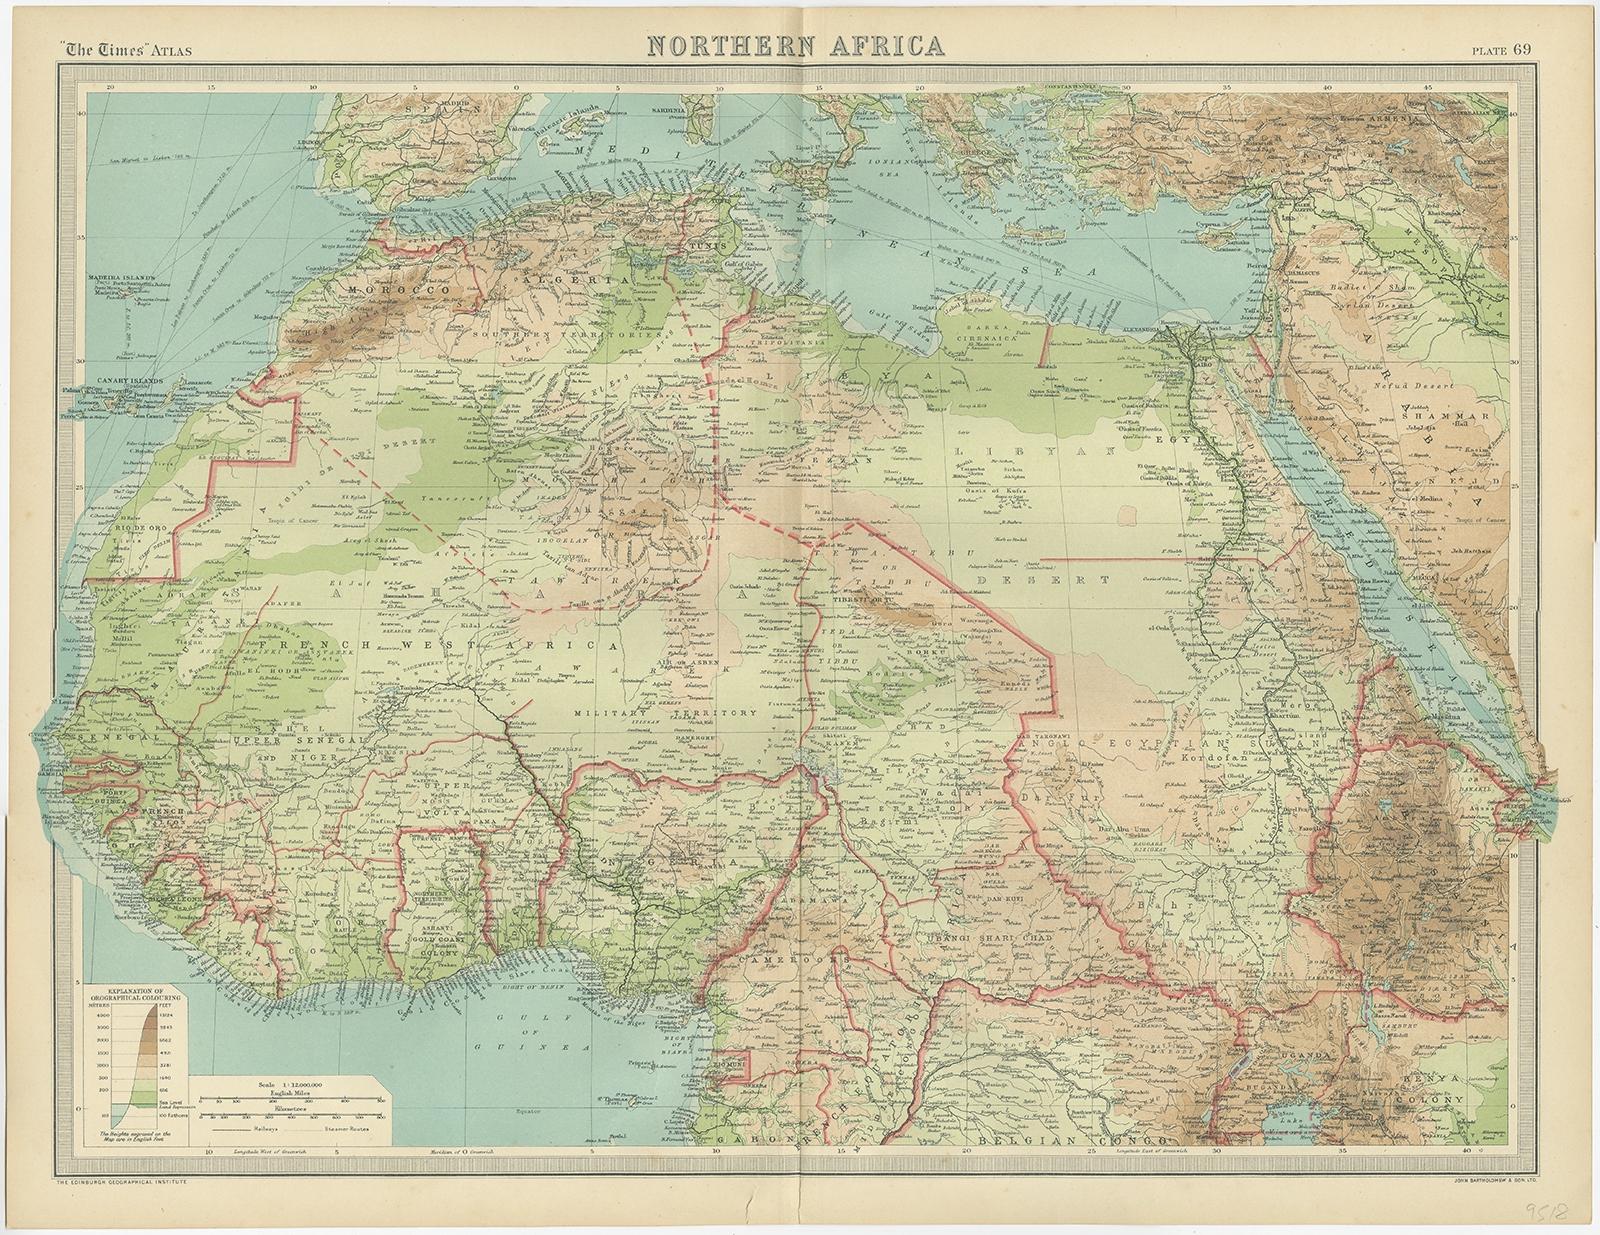 Antique map of Africa titled 'Northern Africa'. 

Old map of North Africa depicting Libya, Morocco, Algeria, Tunis and surroundings. This map originates from 'The Times' atlas. 

Artists and Engravers: John George Bartholomew (22 March 1860 – 14